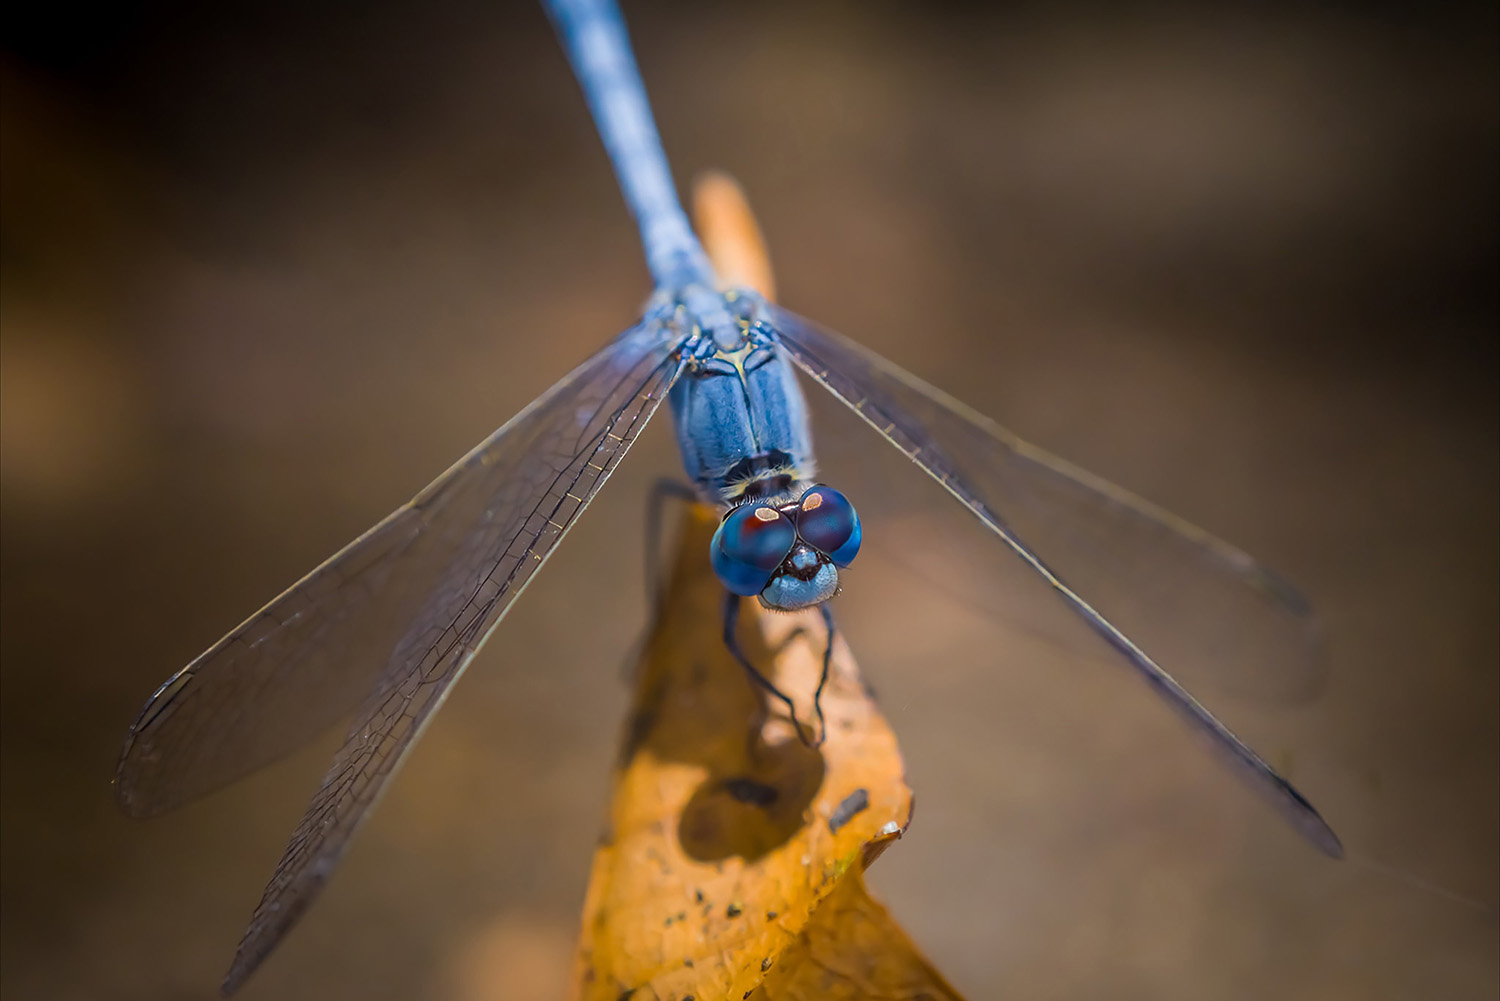 Photograph of a common blue damselfly